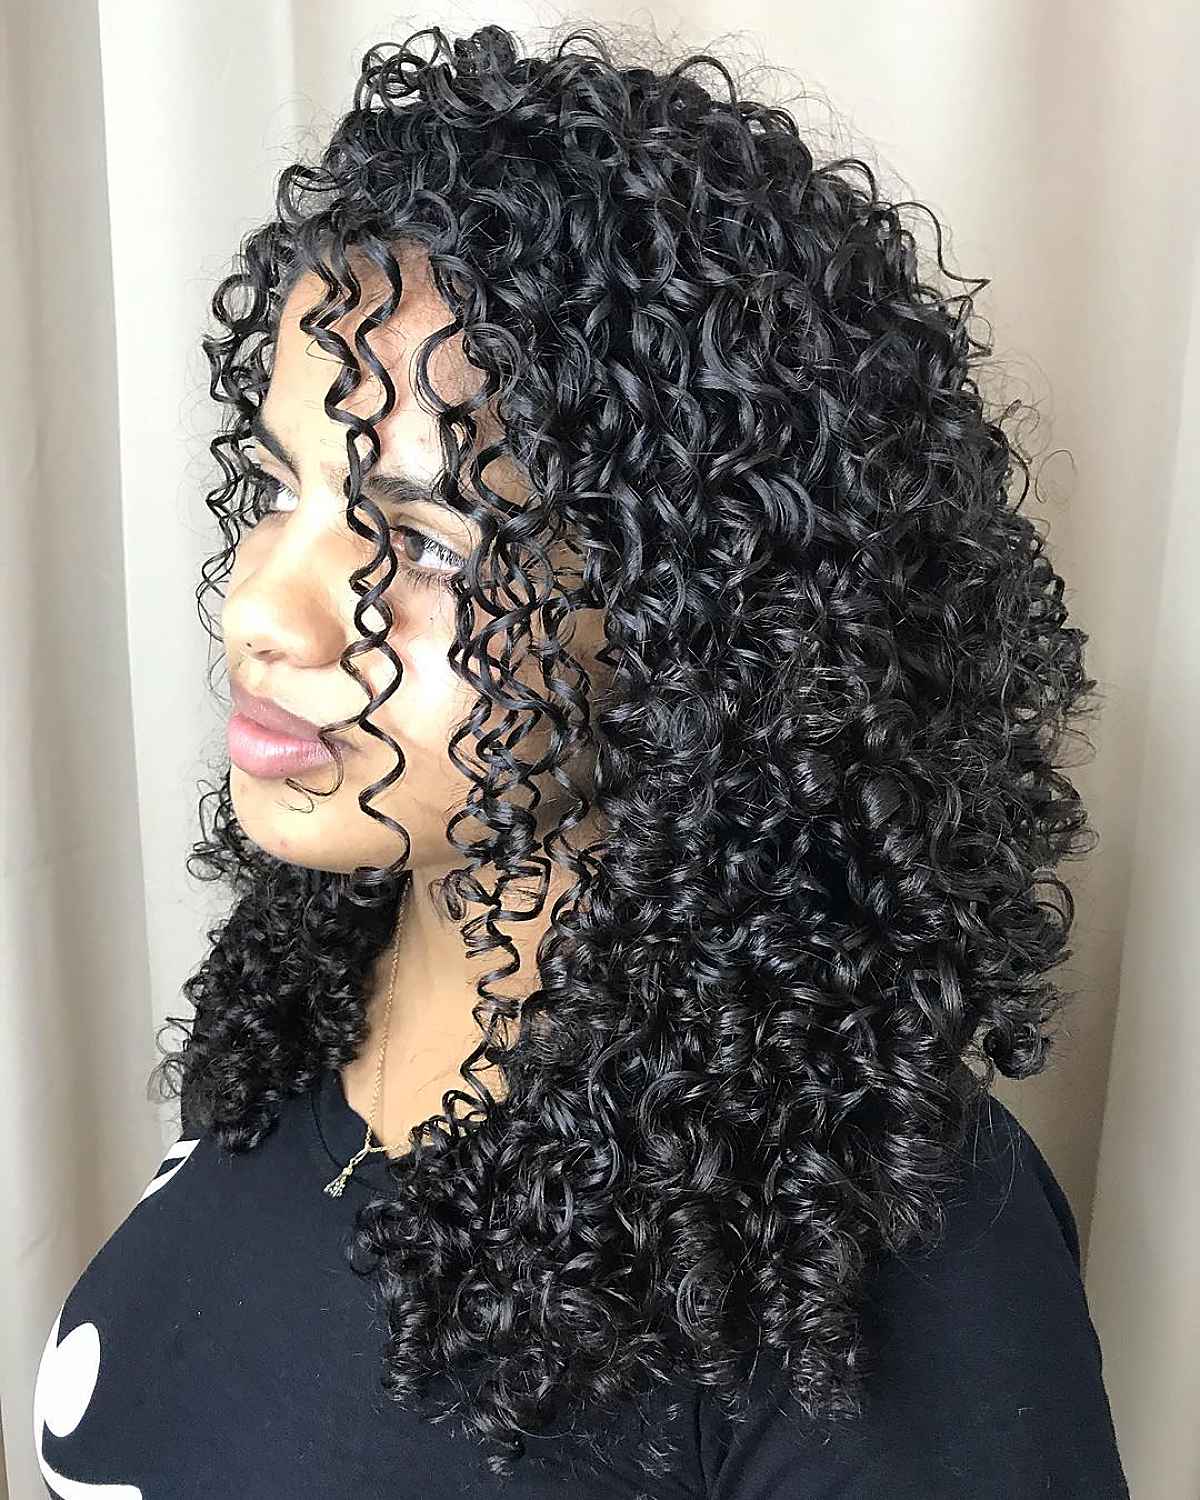 24 Best Haircut Ideas for Long & Layered Curly Hair